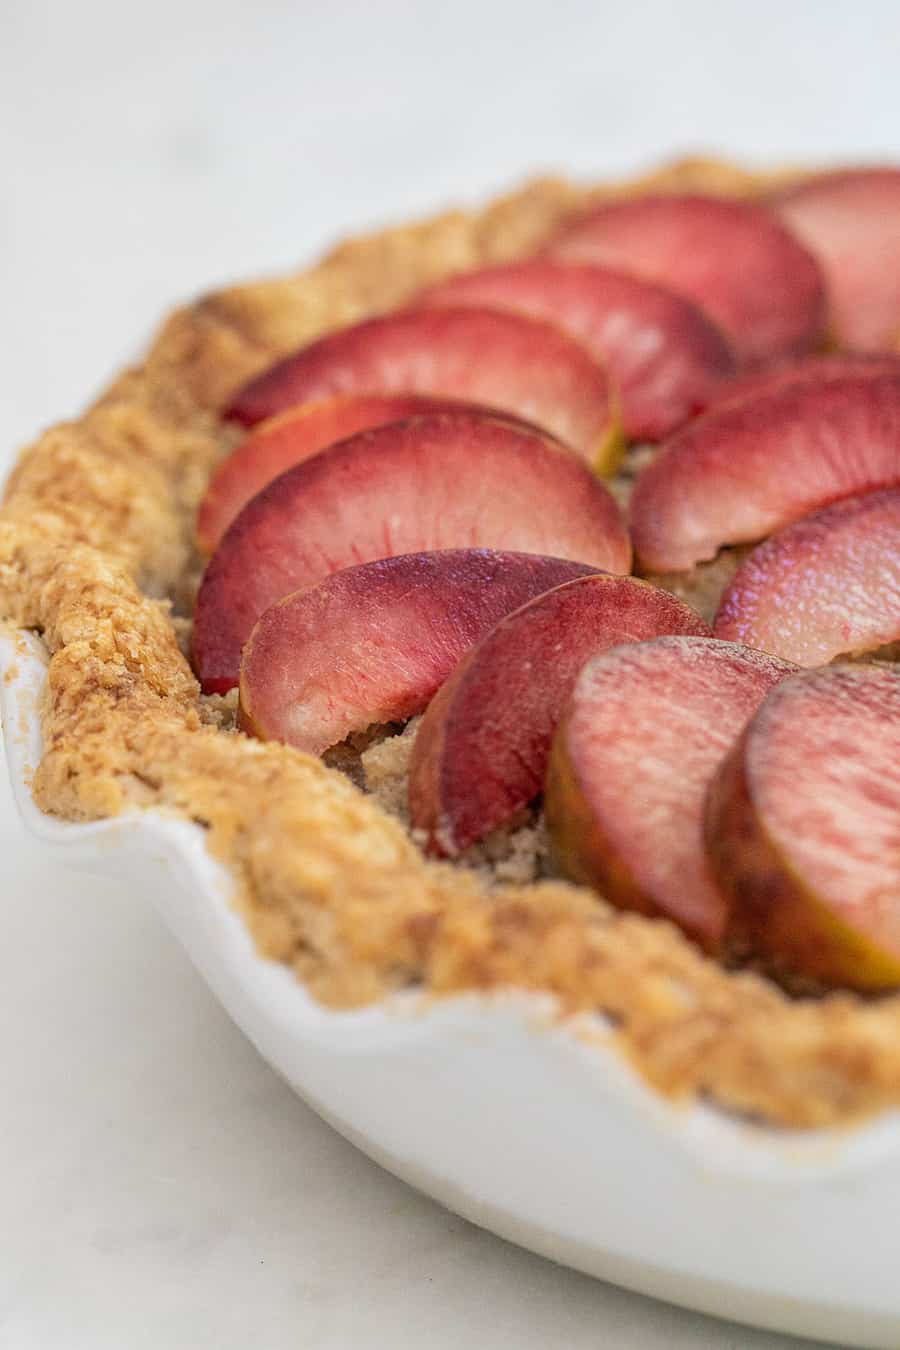 Aprium and plumcot pie with buttery pie crust and sliced plumcots.